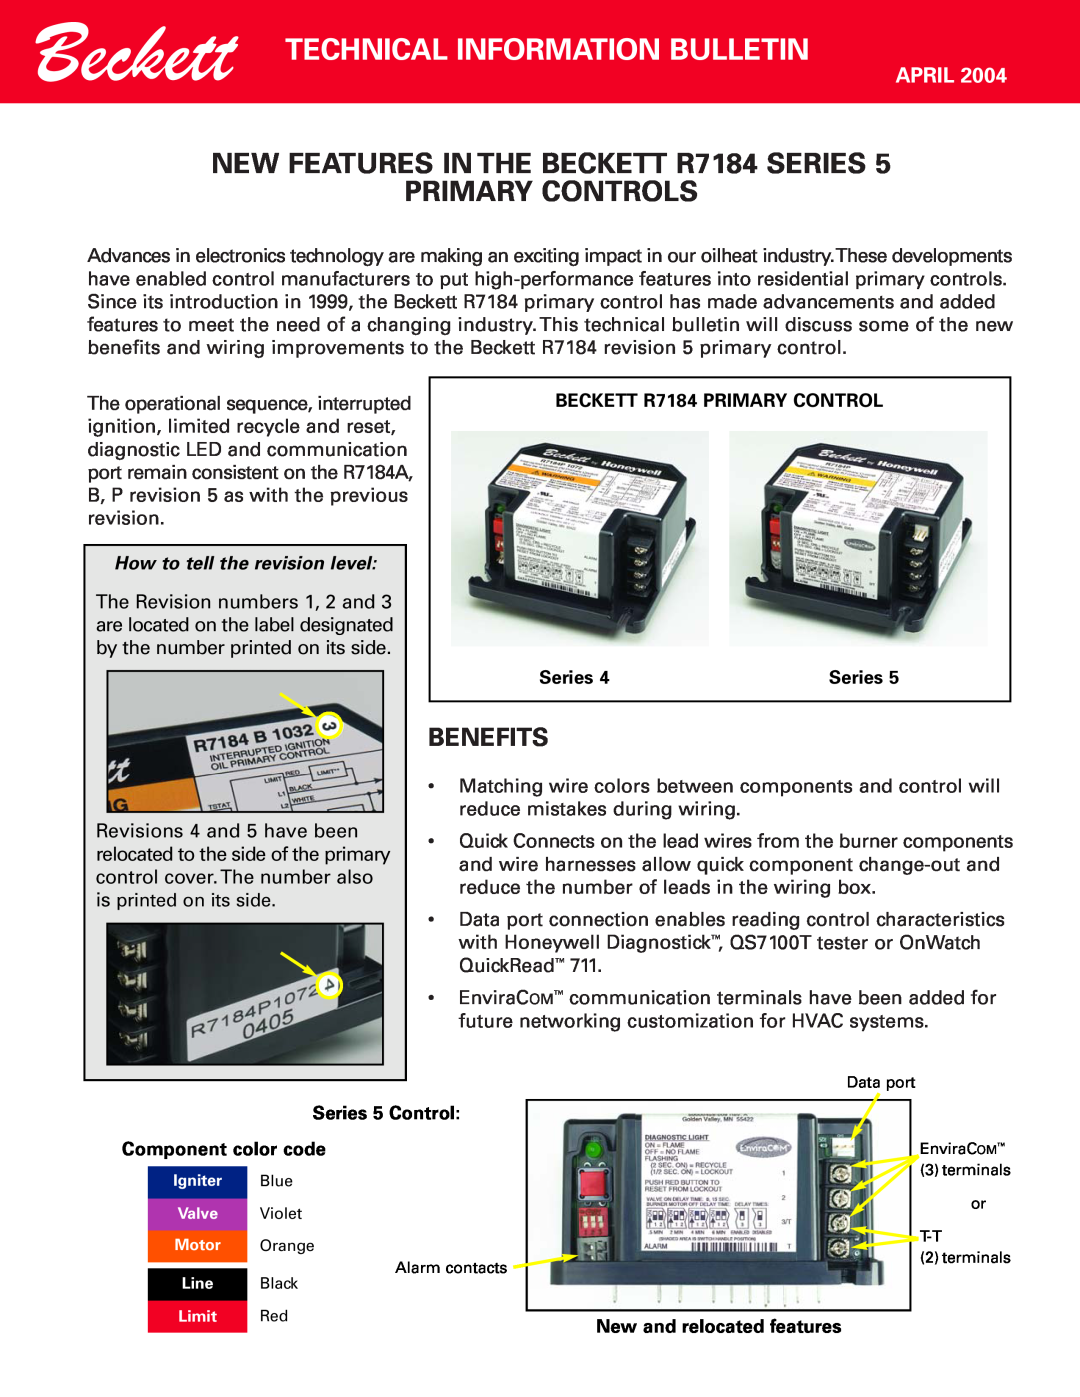 Beckett manual Technical Information Bulletin, NEW FEATURES IN THE BECKETT R7184 SERIES PRIMARY CONTROLS, Benefits 